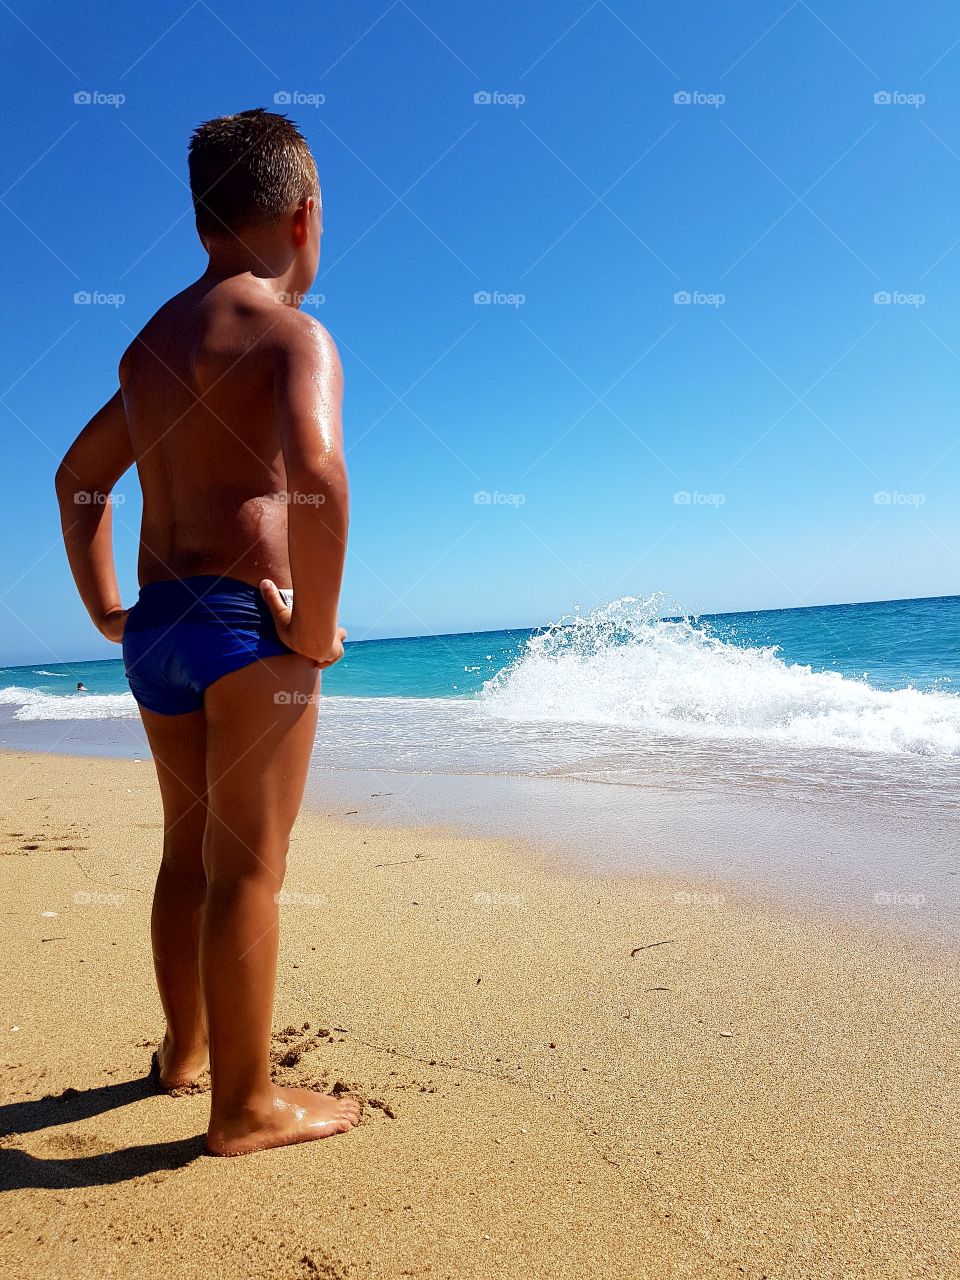 Boy standing on the beach looking at the waves